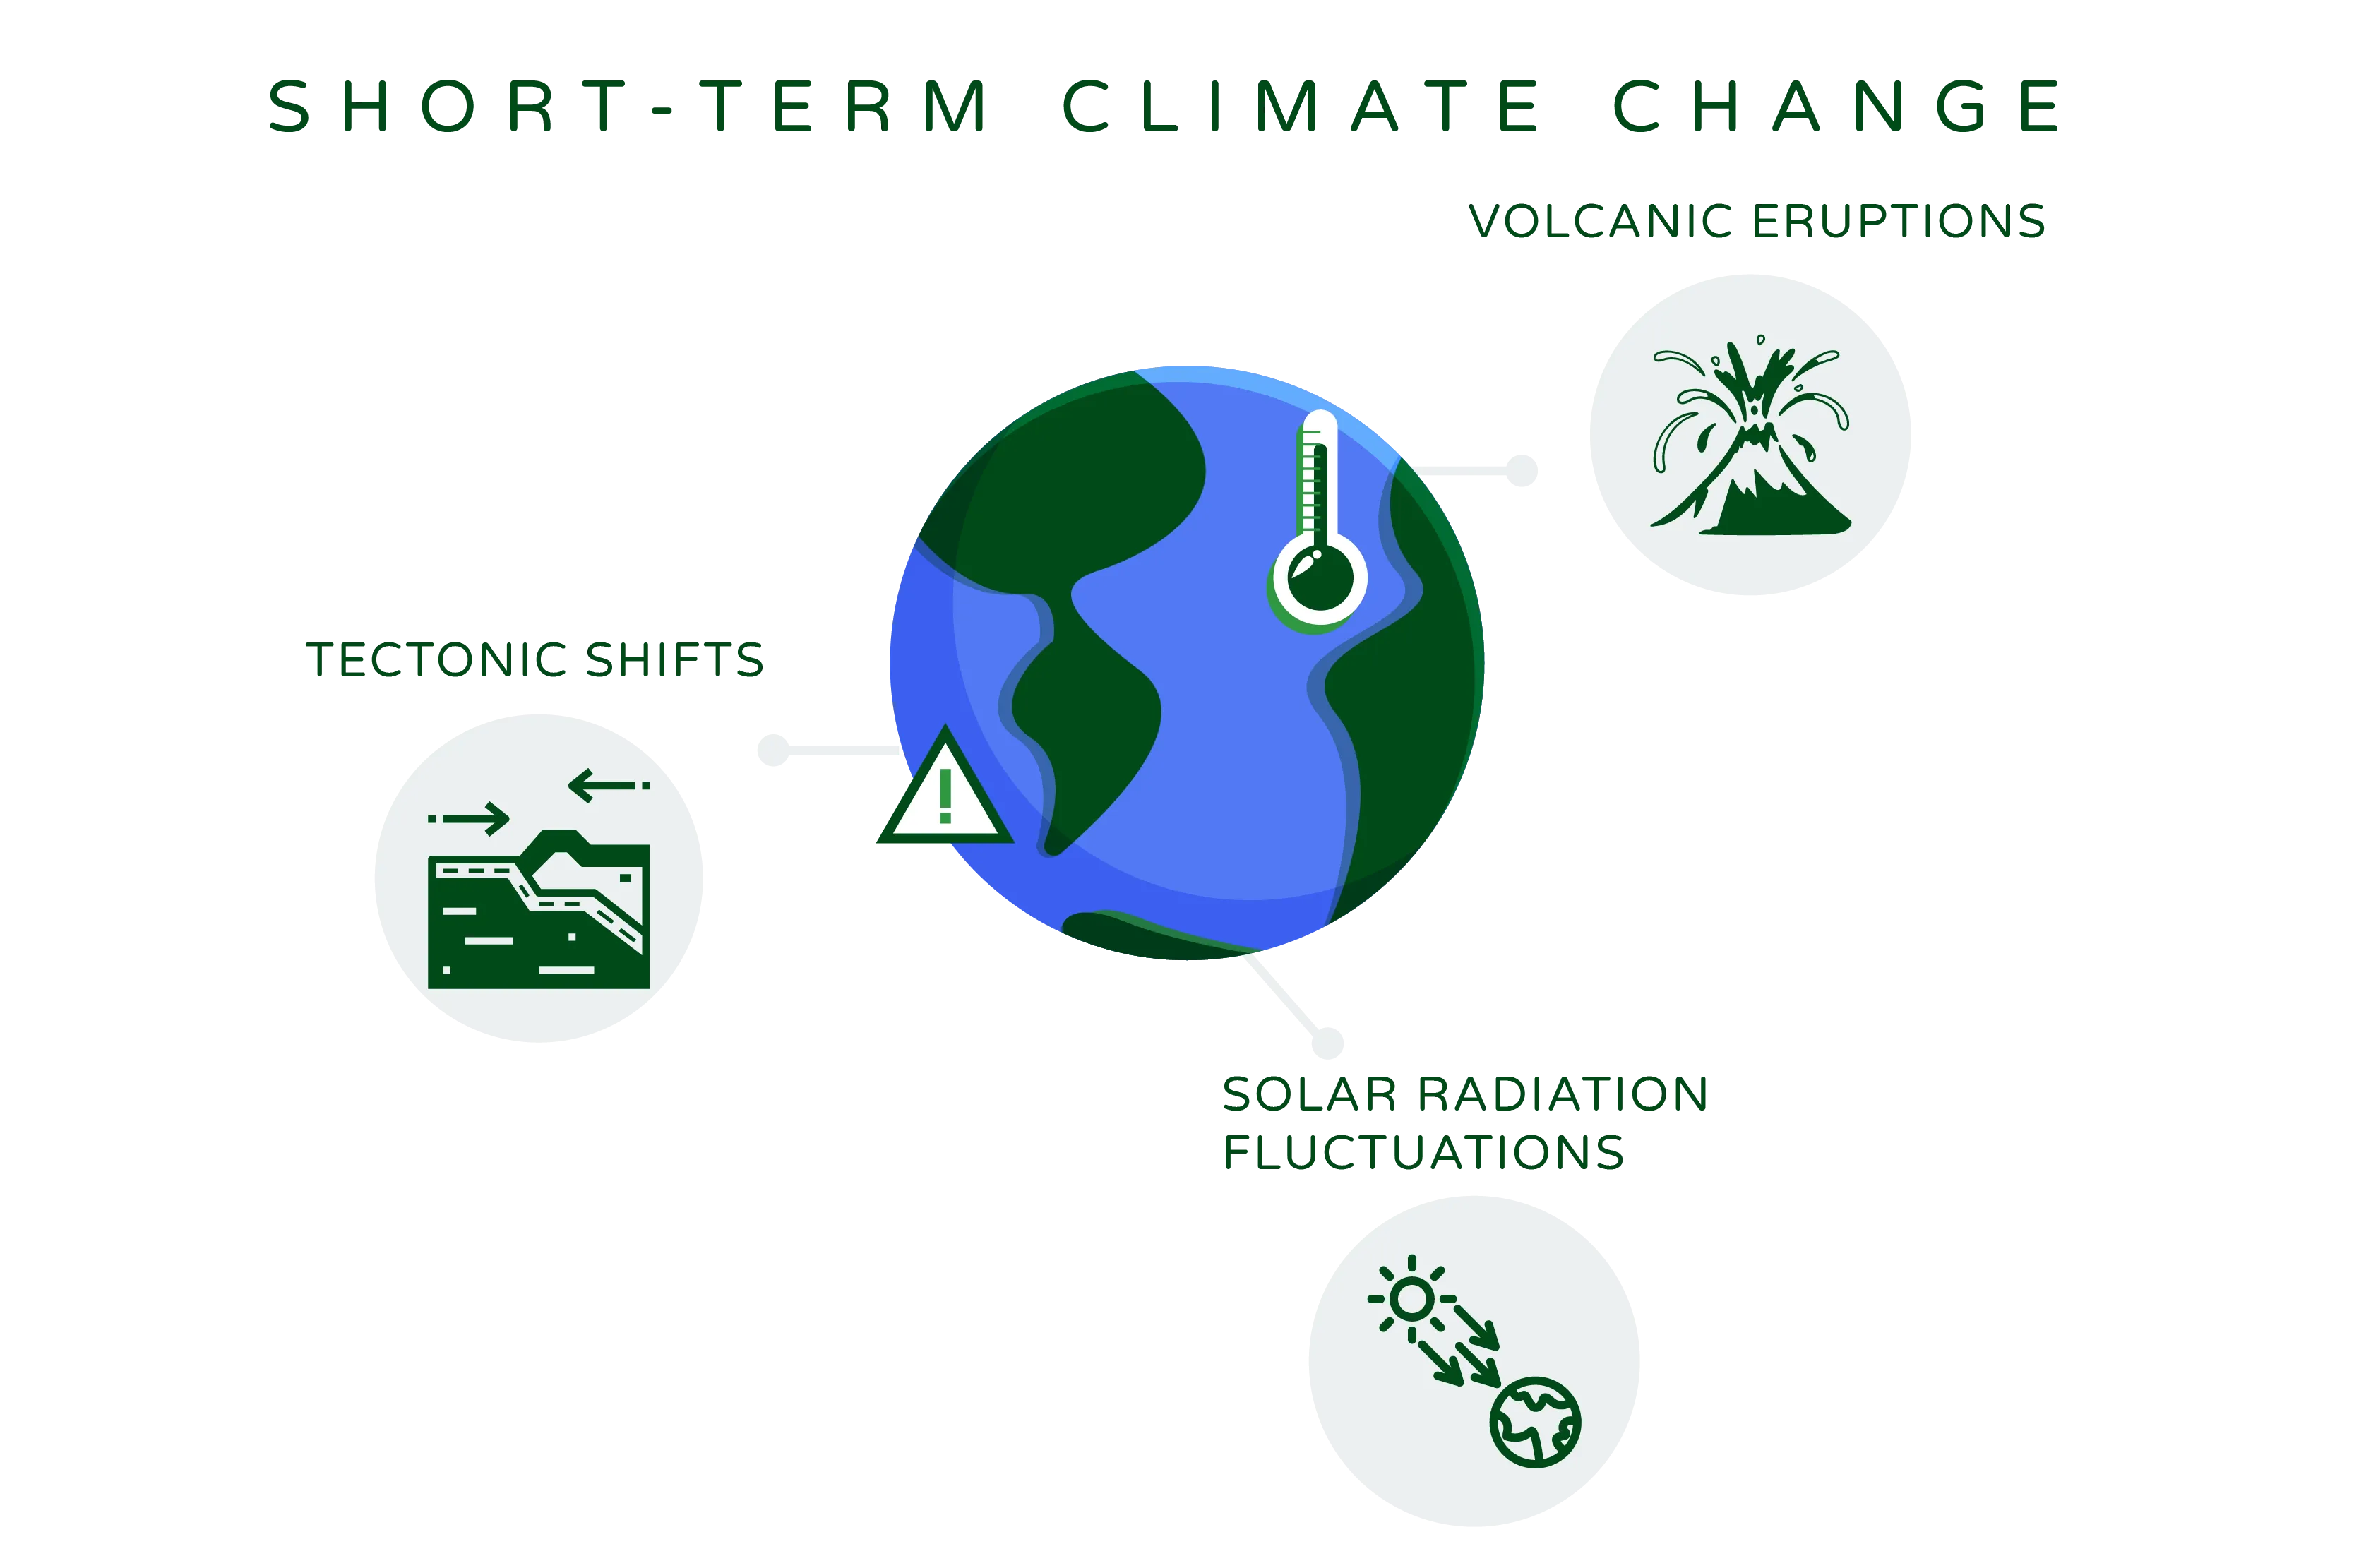 Illustration titled 'Short-Term Climate Change.' The illustration features a globe at the center, representing the Earth. Surrounding the globe are three graphical representations symbolizing different reasons for short-term climate change.  The first graphical symbol represents Volcanic Eruptions, indicating the impact of volcanic activities on climate through the release of ash, gases, and particles into the atmosphere.  The second graphical symbol represents Tectonic Shifts, suggesting the influence of geological movements and plate tectonics on climate patterns.  The third graphical symbol represents Solar Radiation Fluctuations, highlighting the variations in solar energy reaching the Earth's surface, which can affect climate patterns.  The illustration visually communicates the factors contributing to short-term climate change, emphasizing the role of volcanic eruptions, tectonic shifts, and solar radiation fluctuations in shaping the Earth's climate over relatively shorter time periods.